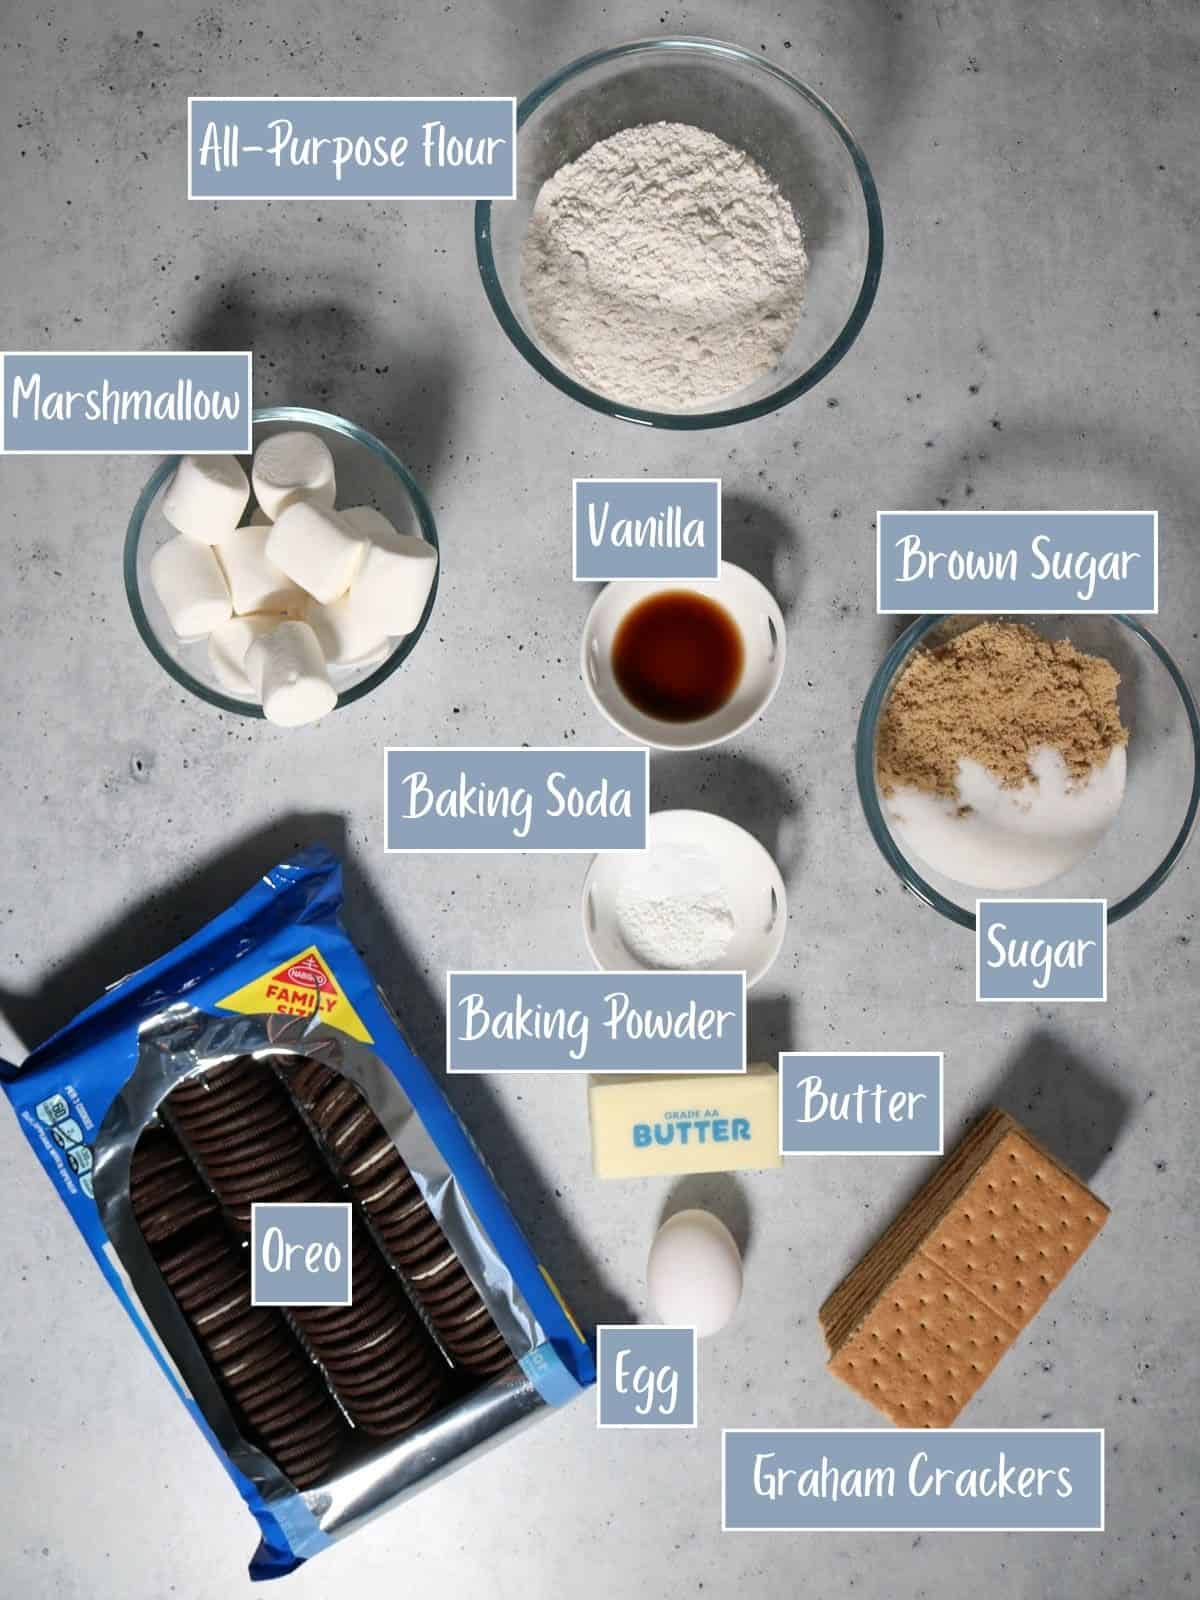 Labeled ingredients for making S'moreo cookies.